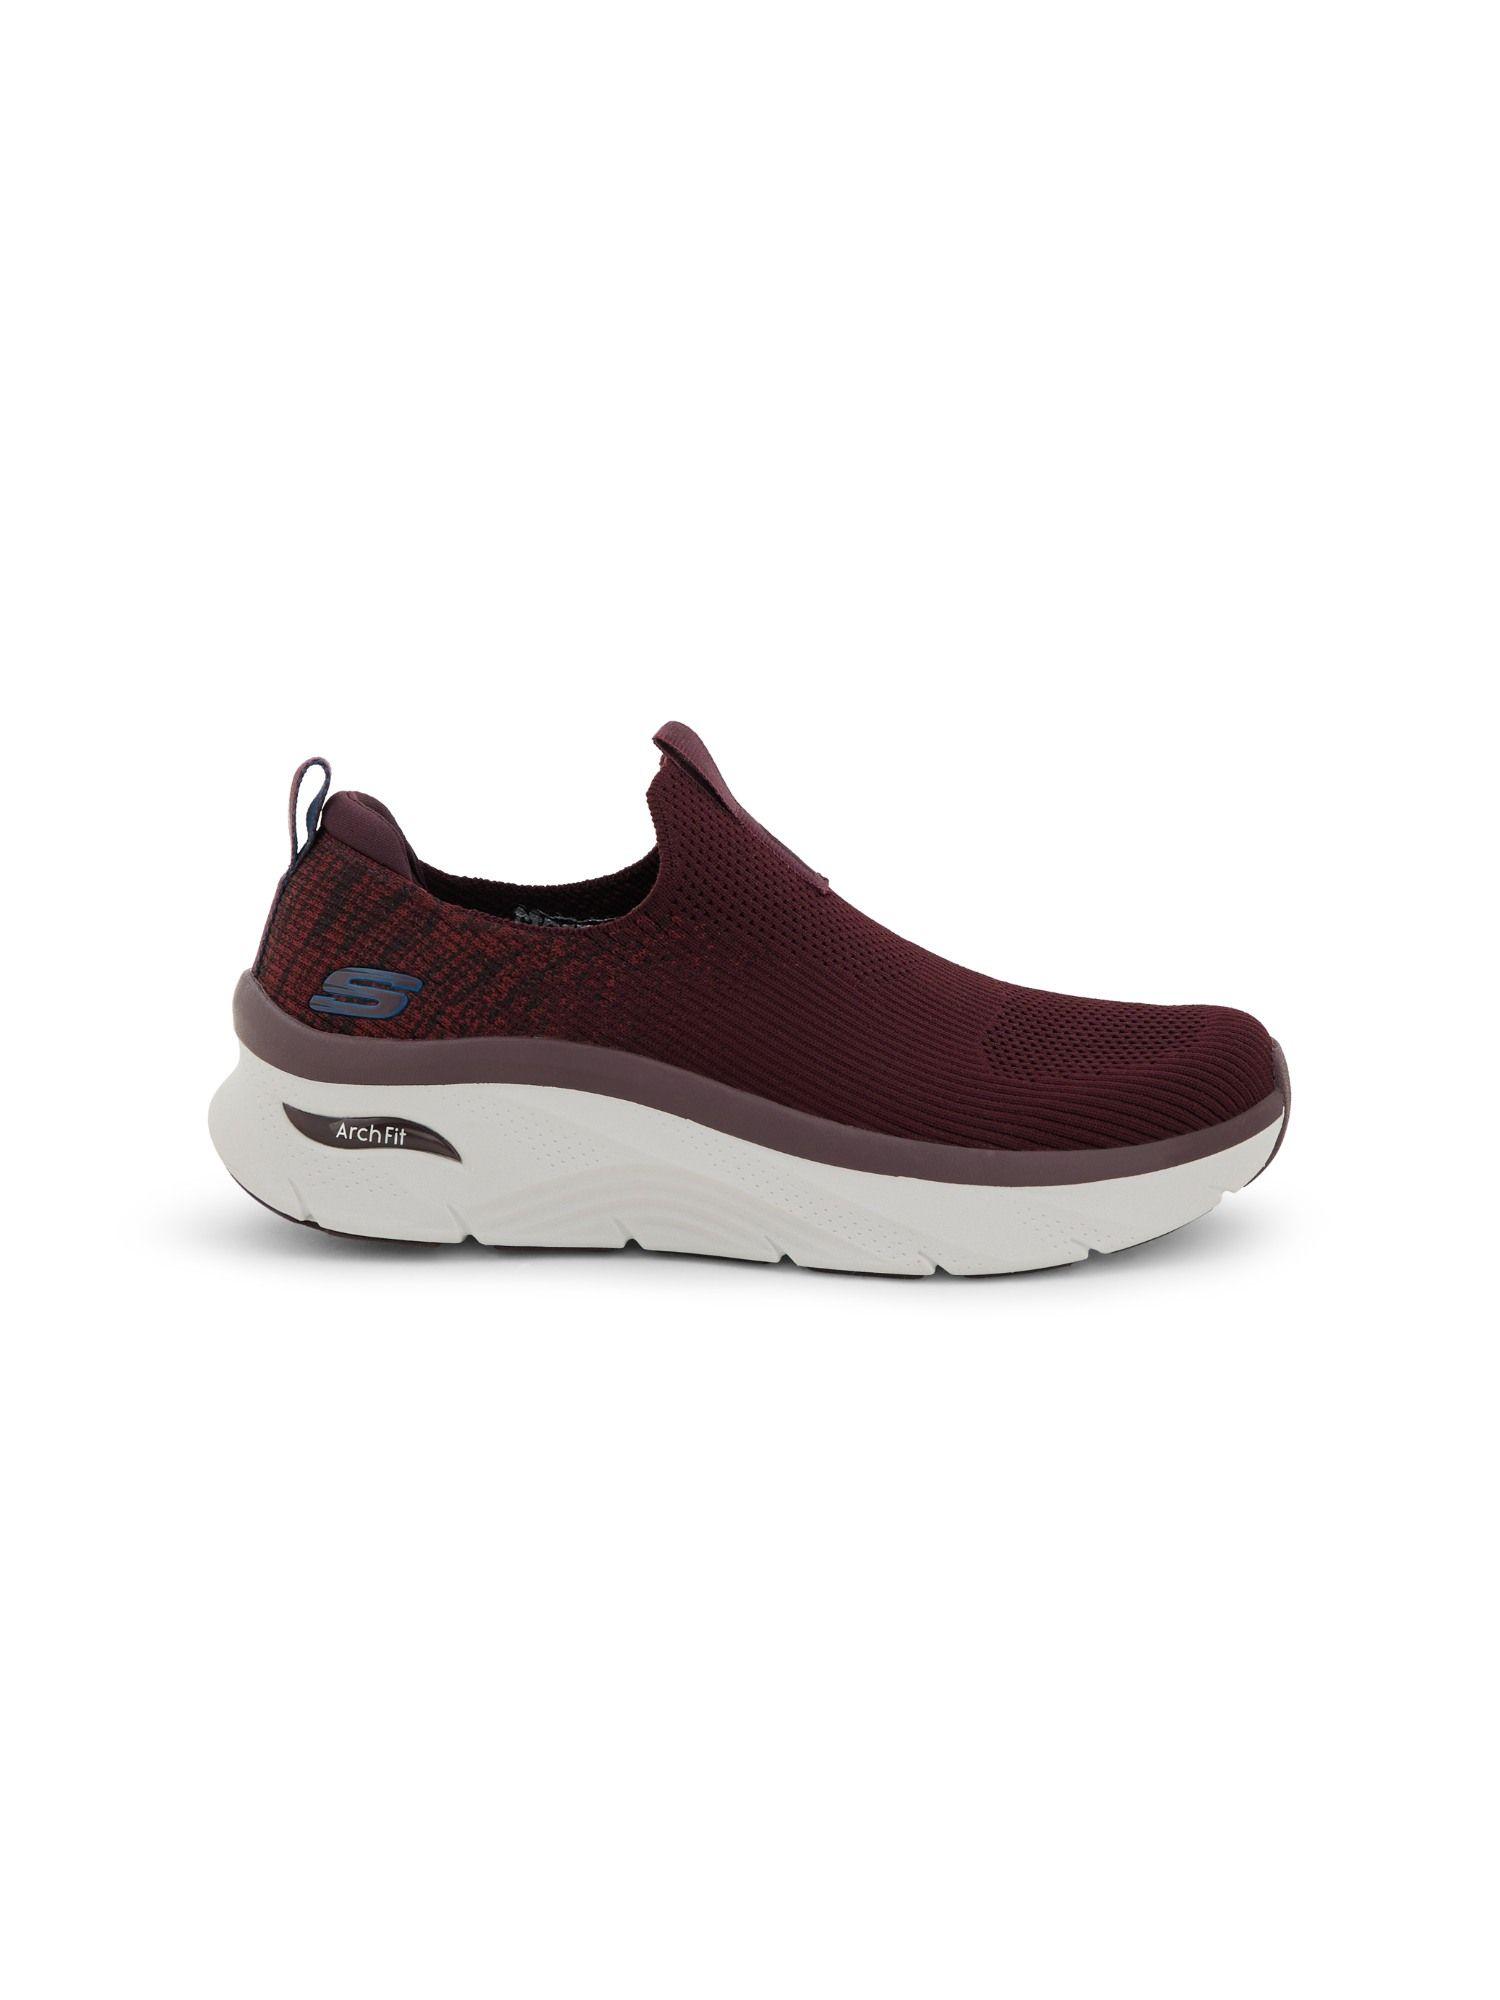 arch-fit-d'lux-key-journey-burgundy-sneakers